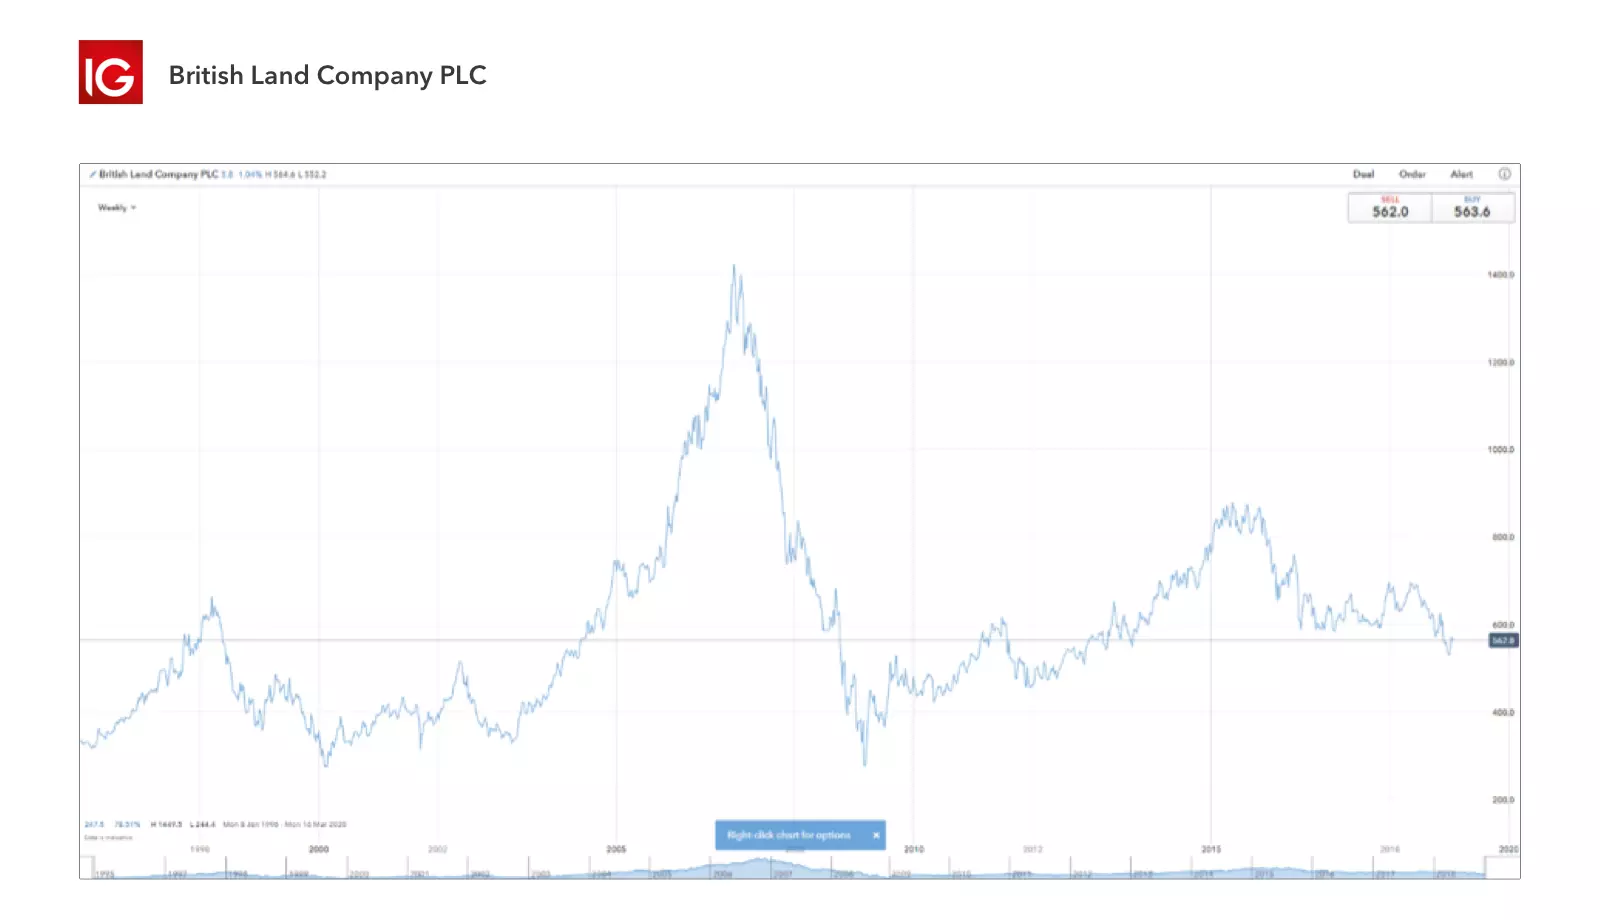 REIT company British Land’s historical price chart shows an average price of £5.50 during 2018